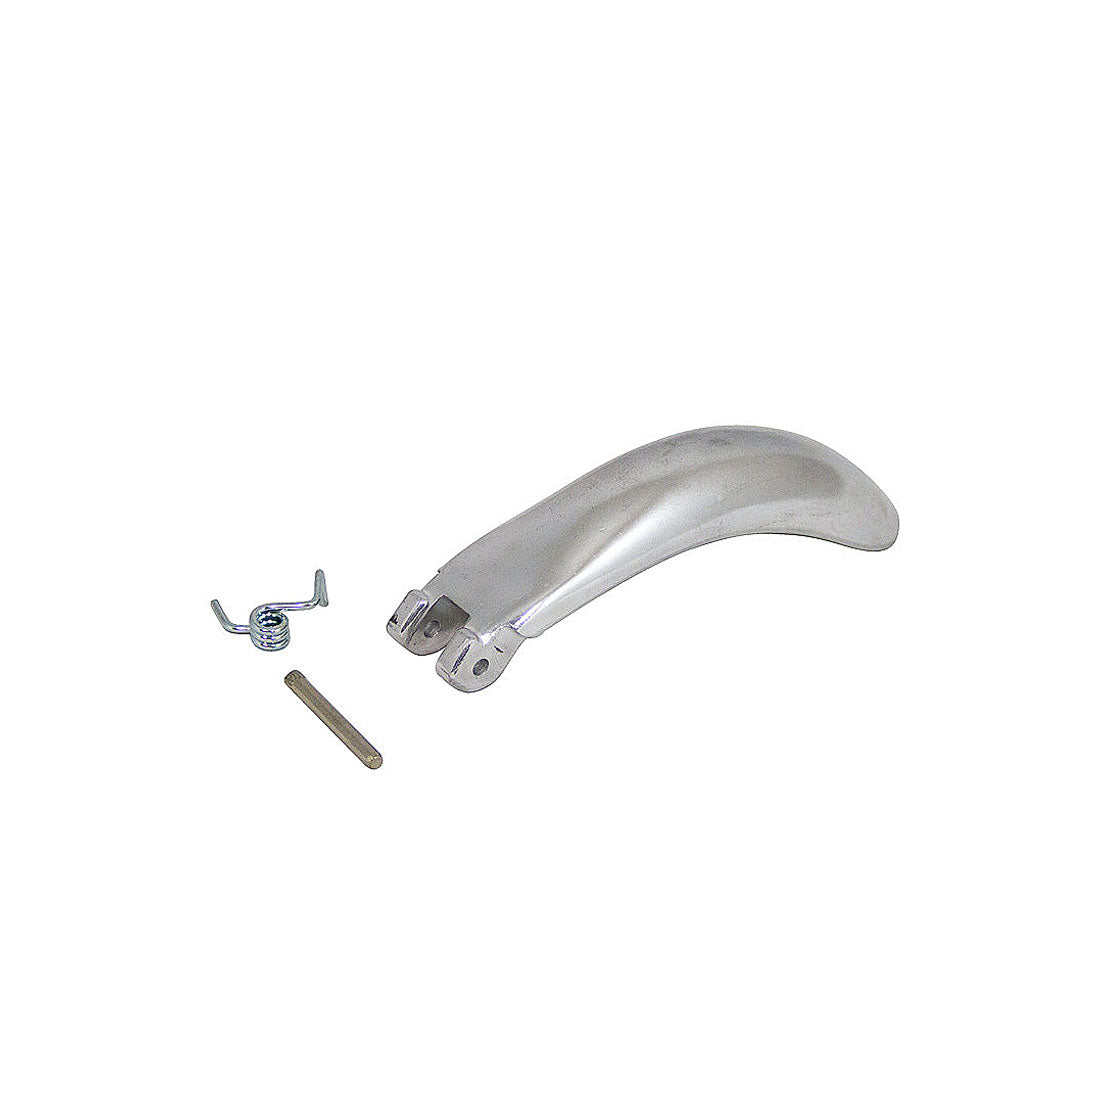 Micro Flex Complete Brake - 1243 Scooter Hardware and Parts